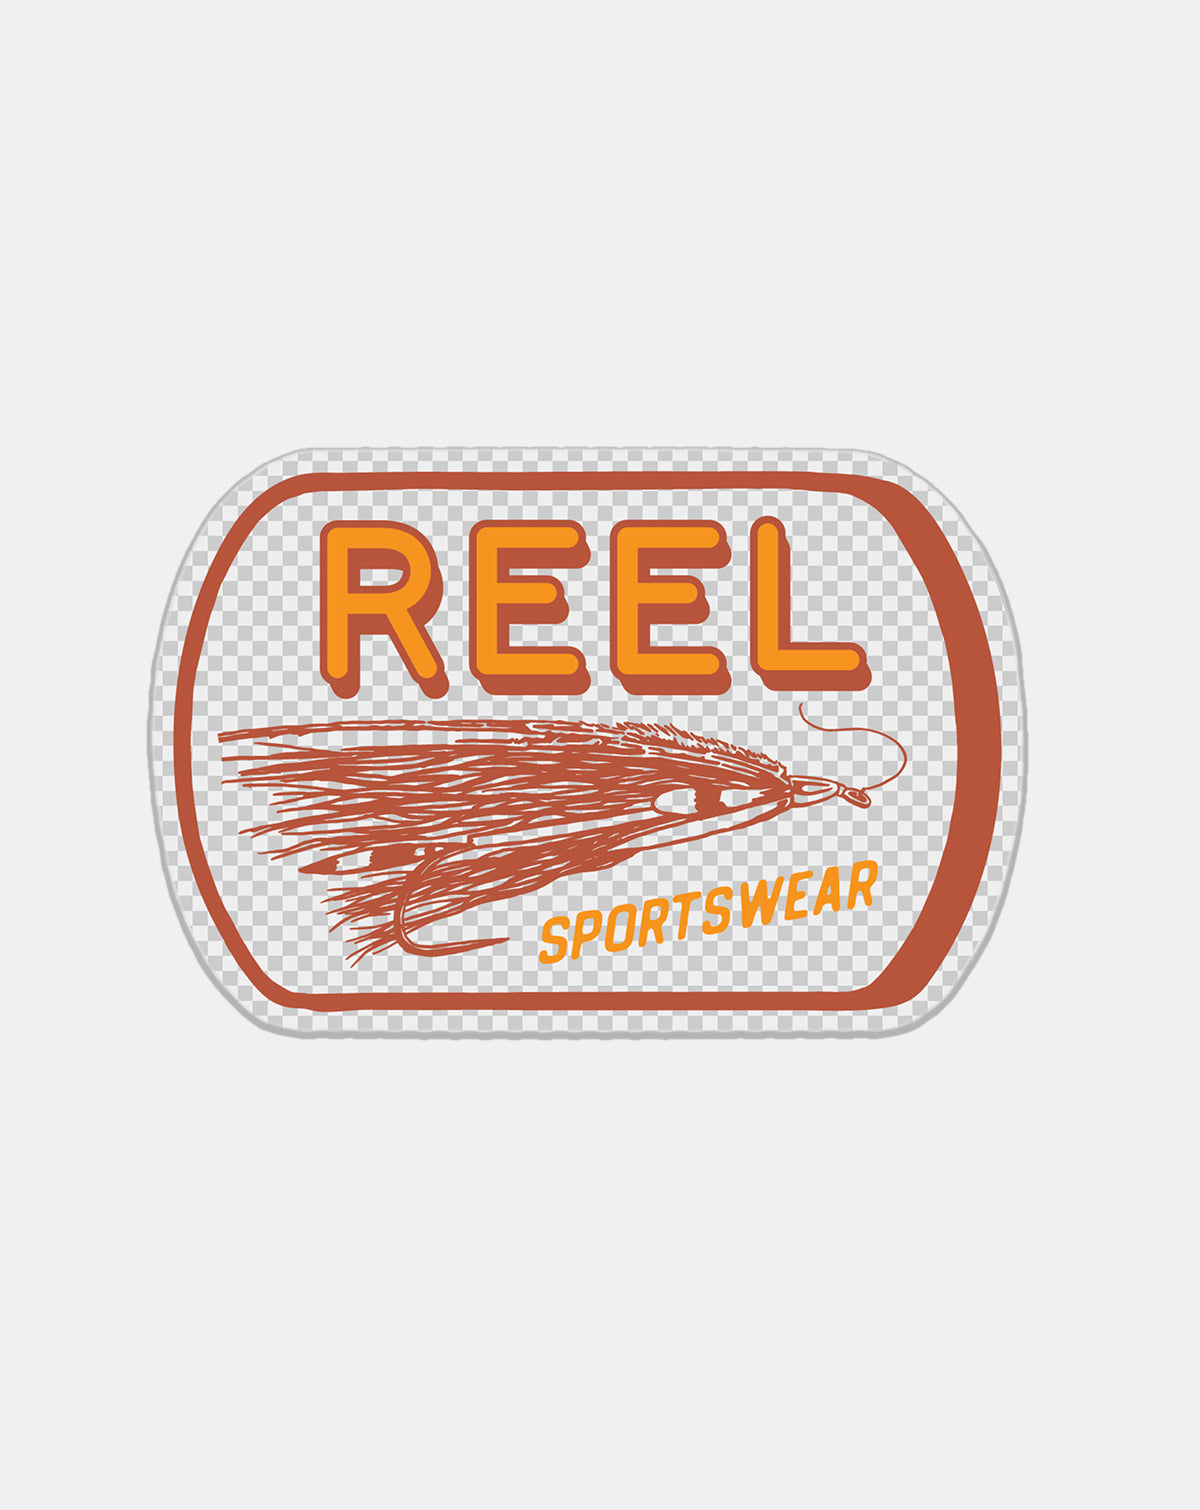 Fly fishing decal